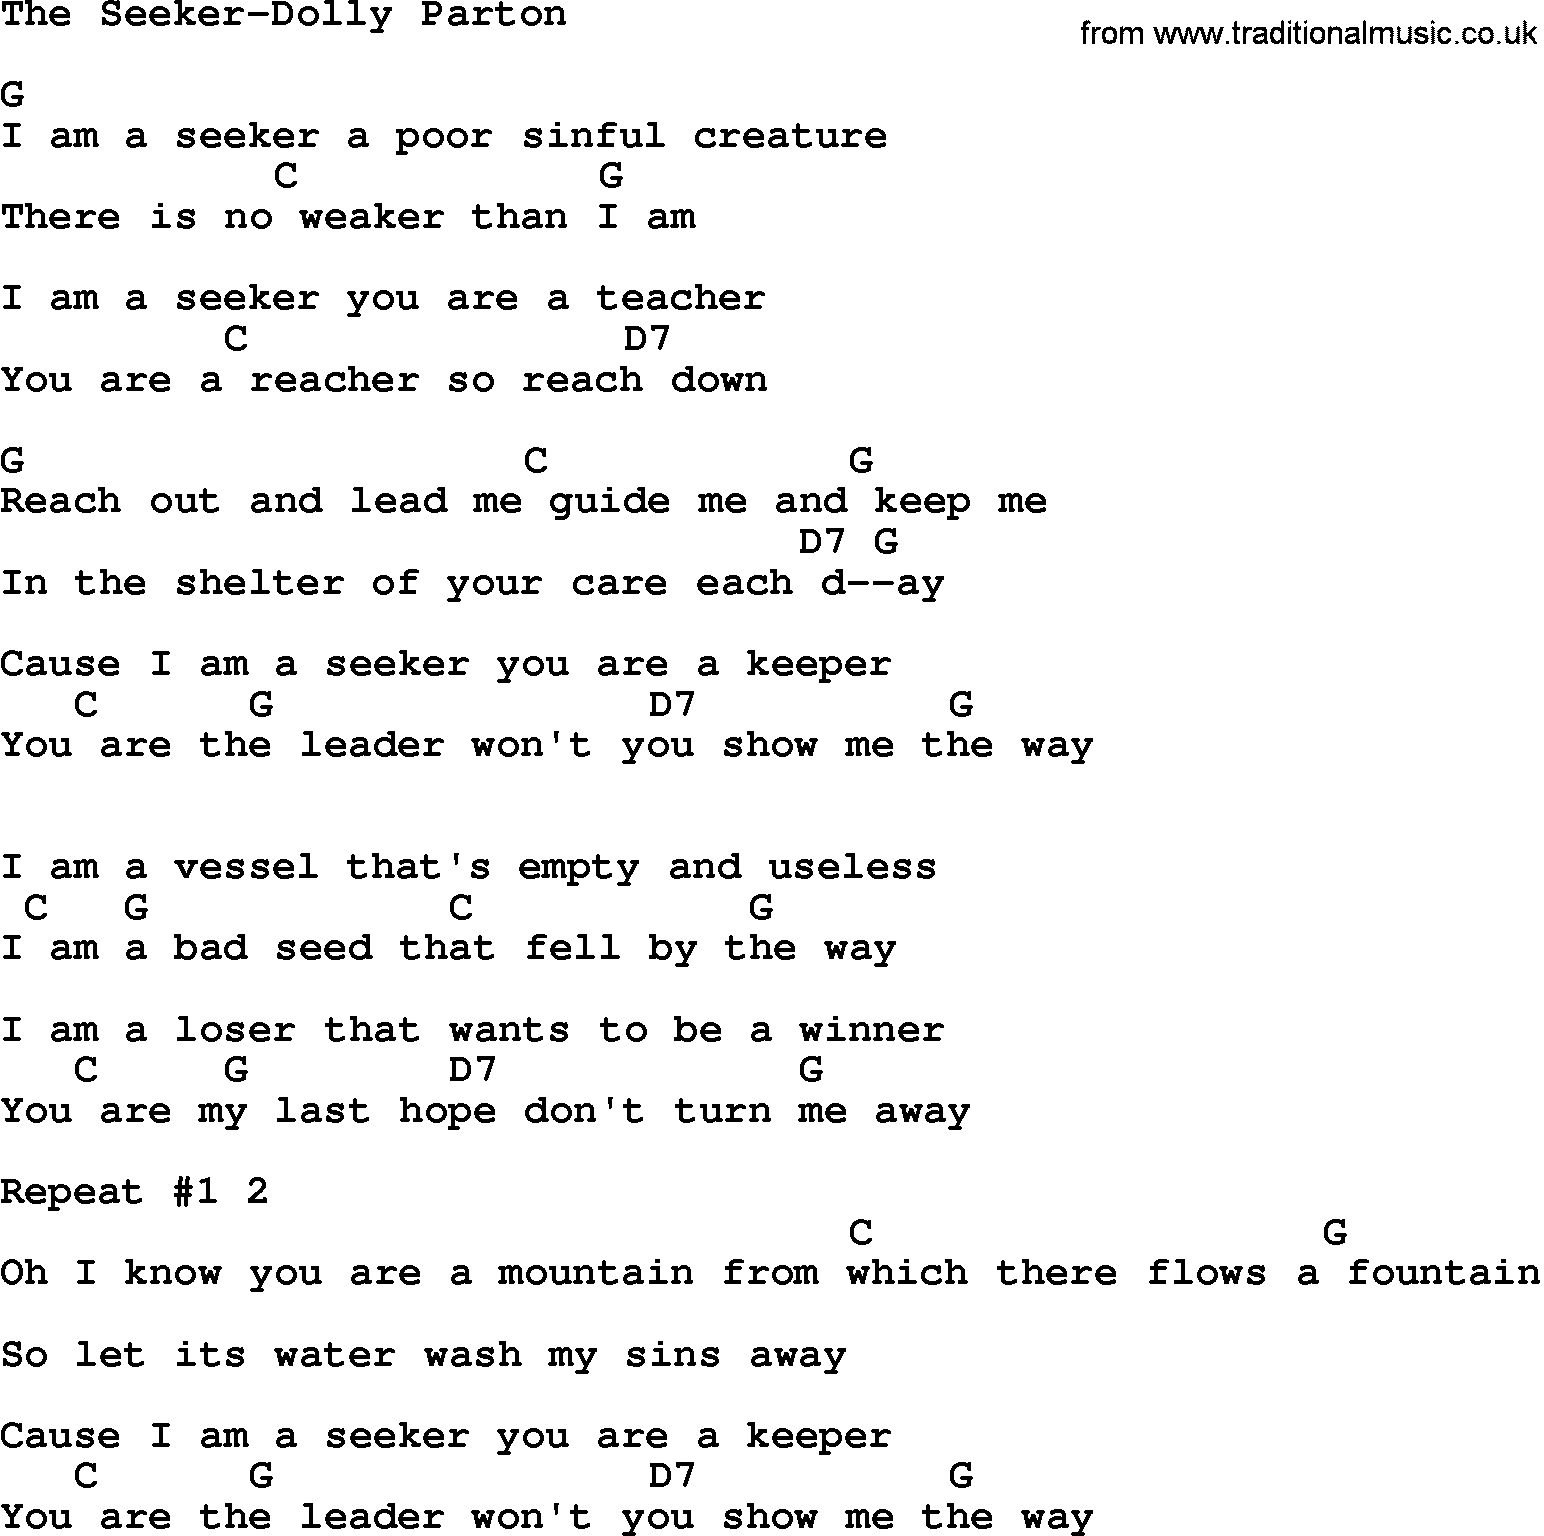 Country music song: The Seeker-Dolly Parton lyrics and chords